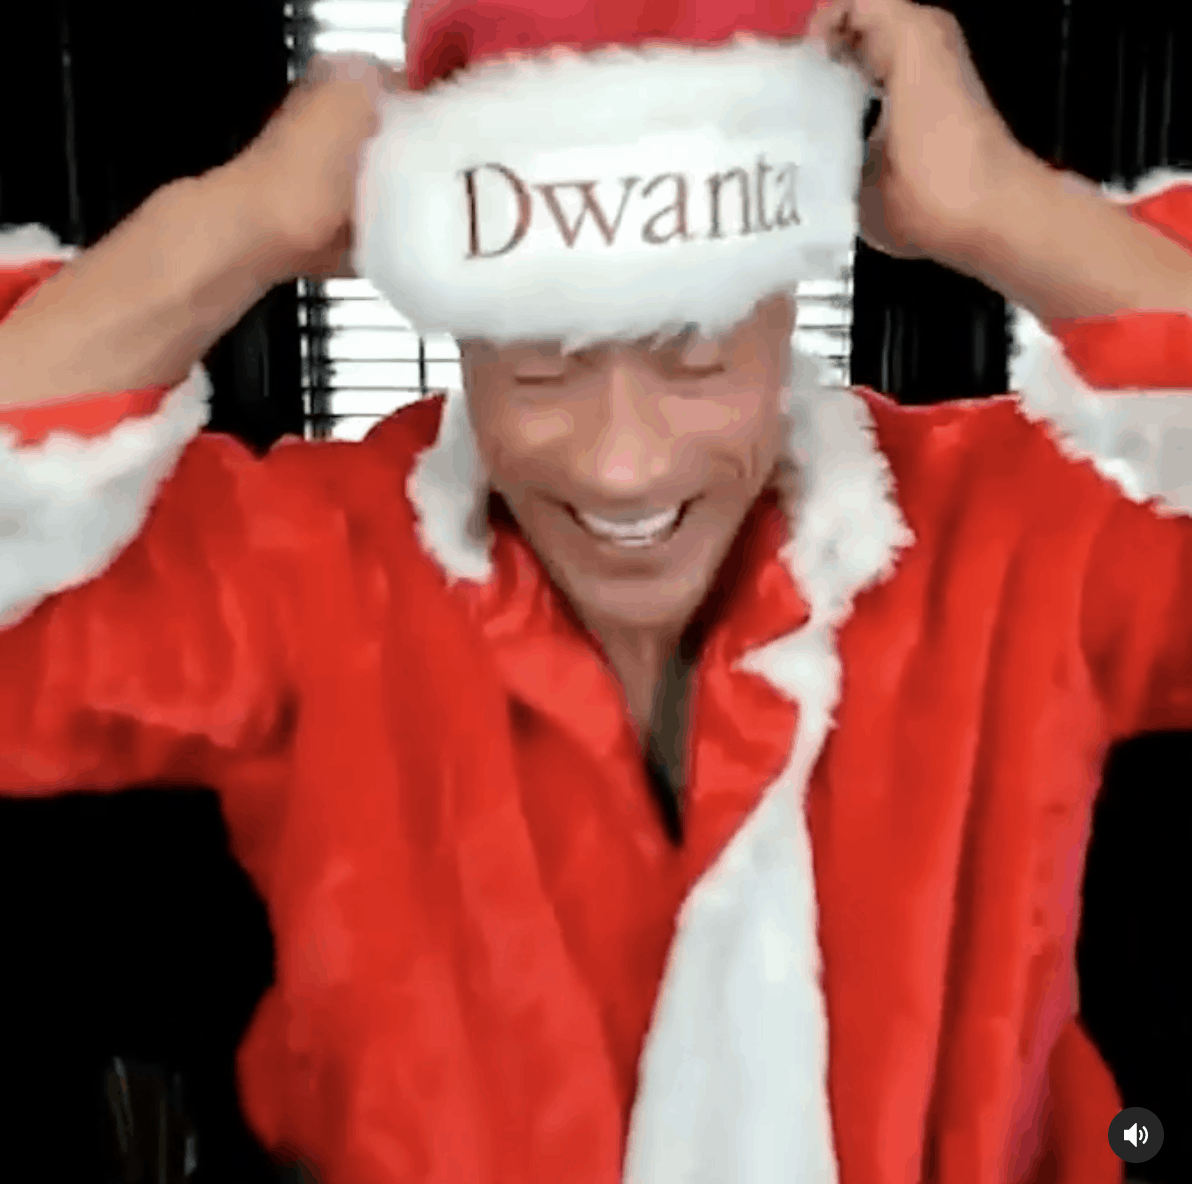 Dwayne Johnson (THE ROCK) : Dwanta Claus in this Christmas